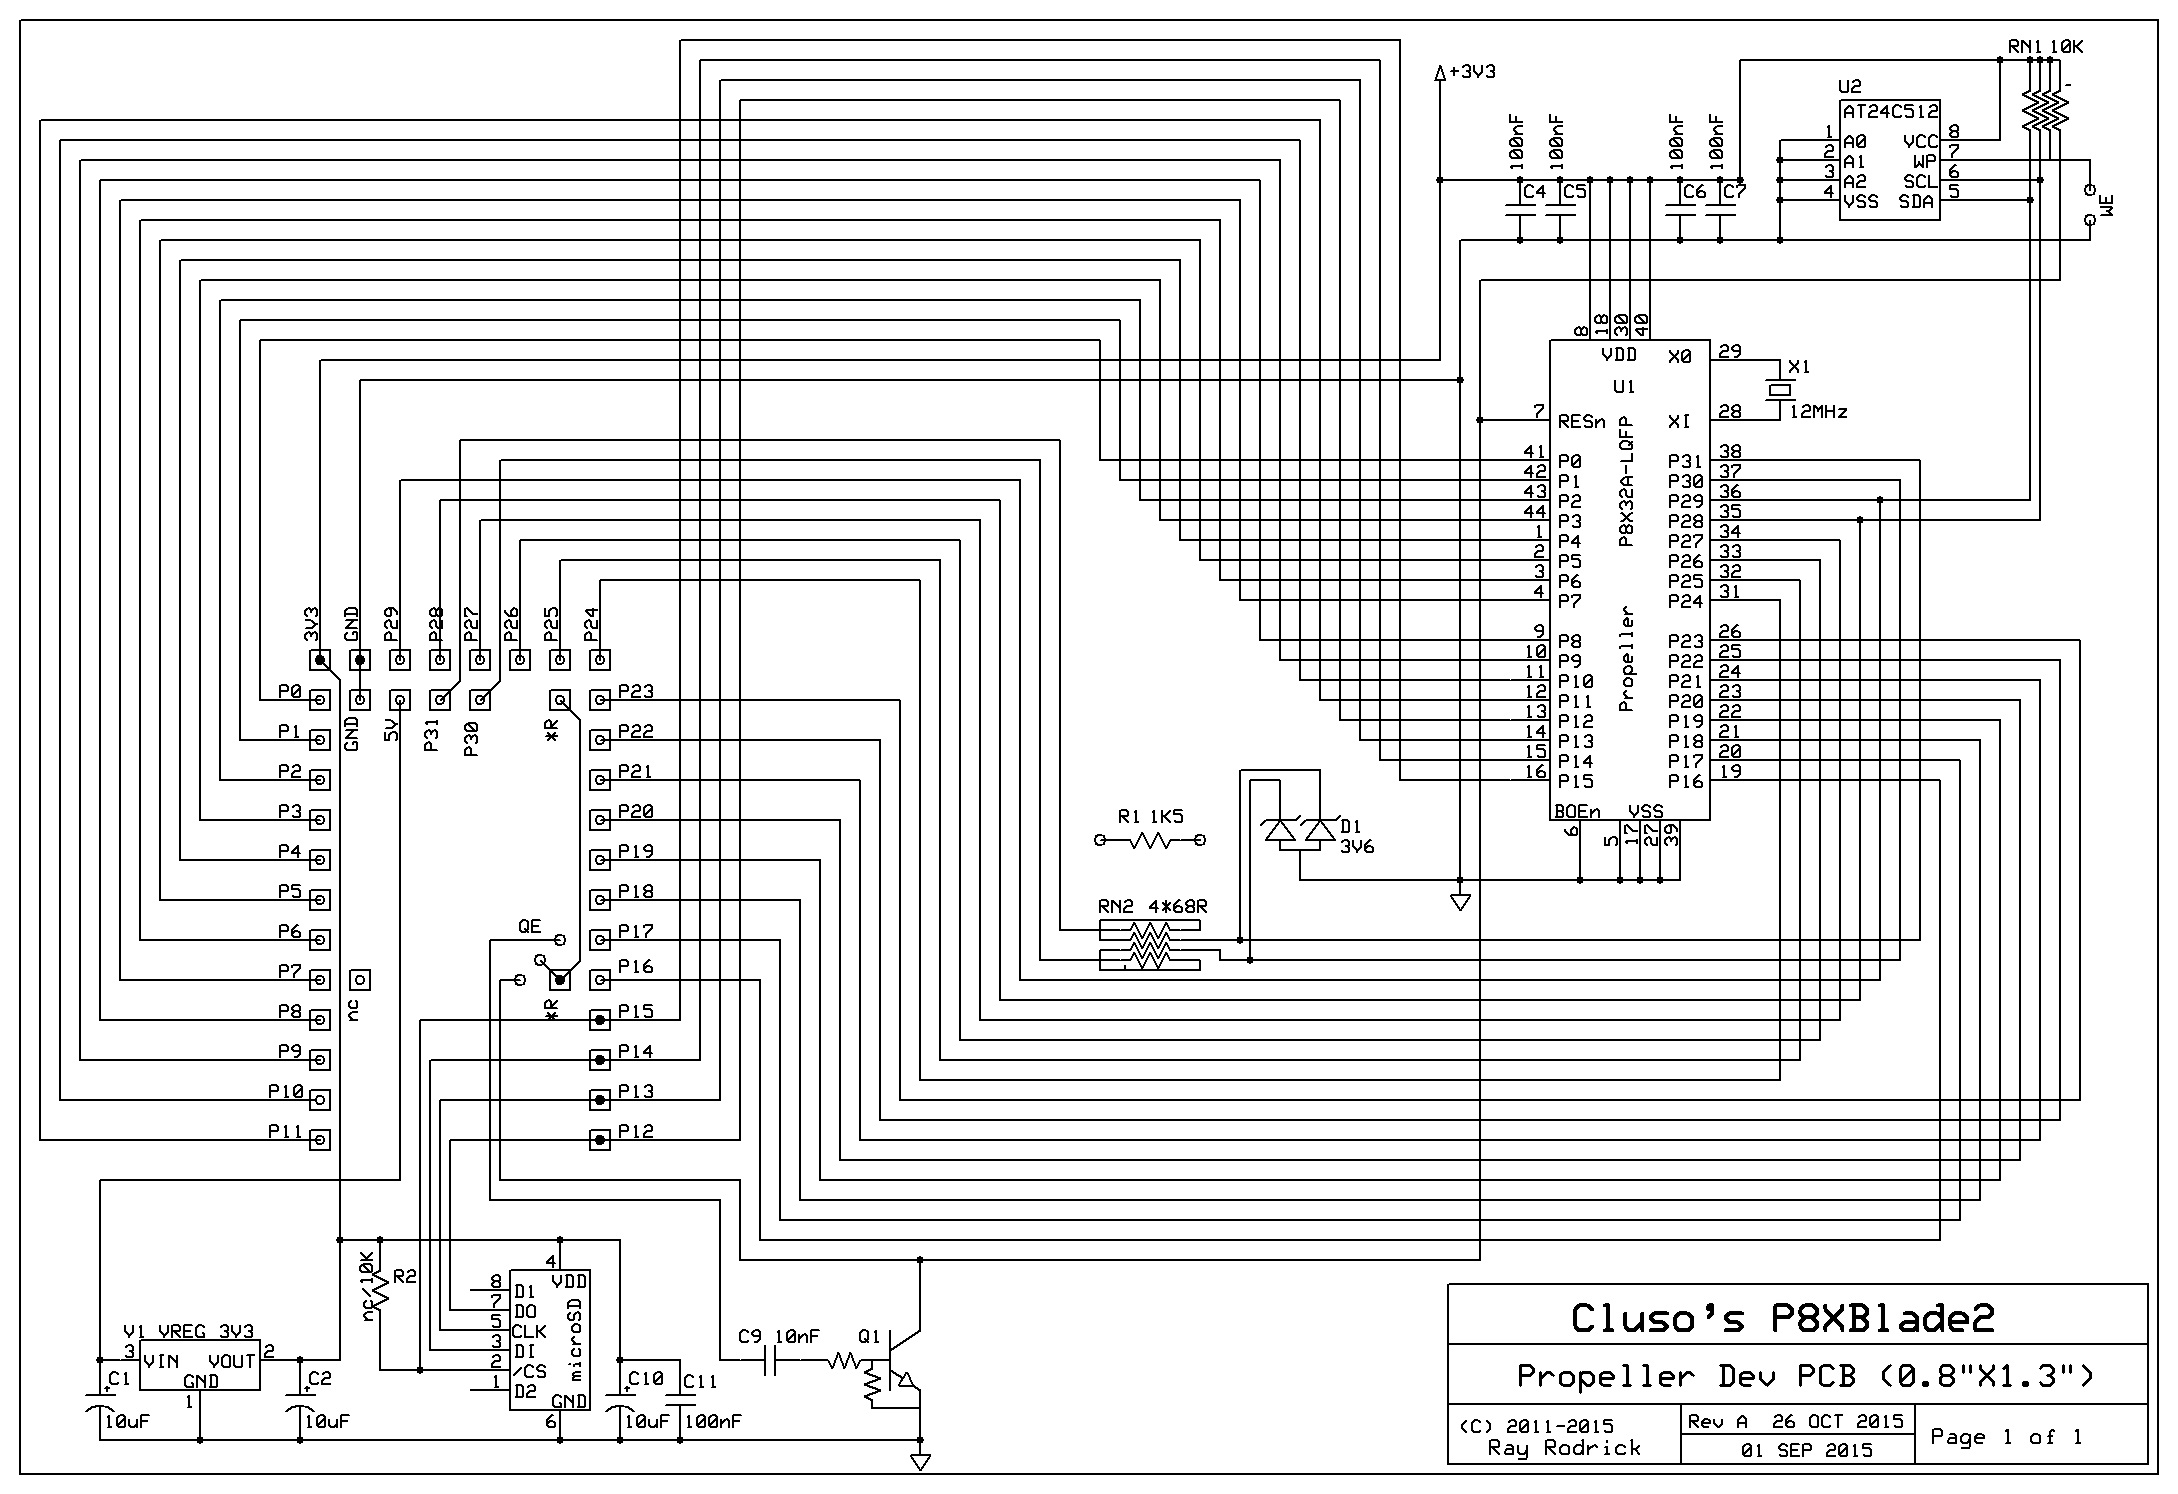 P8XBlade2 Schematic. Note the Reset Circuit requires a link to operate, as does the WE link to write to EEPROM.